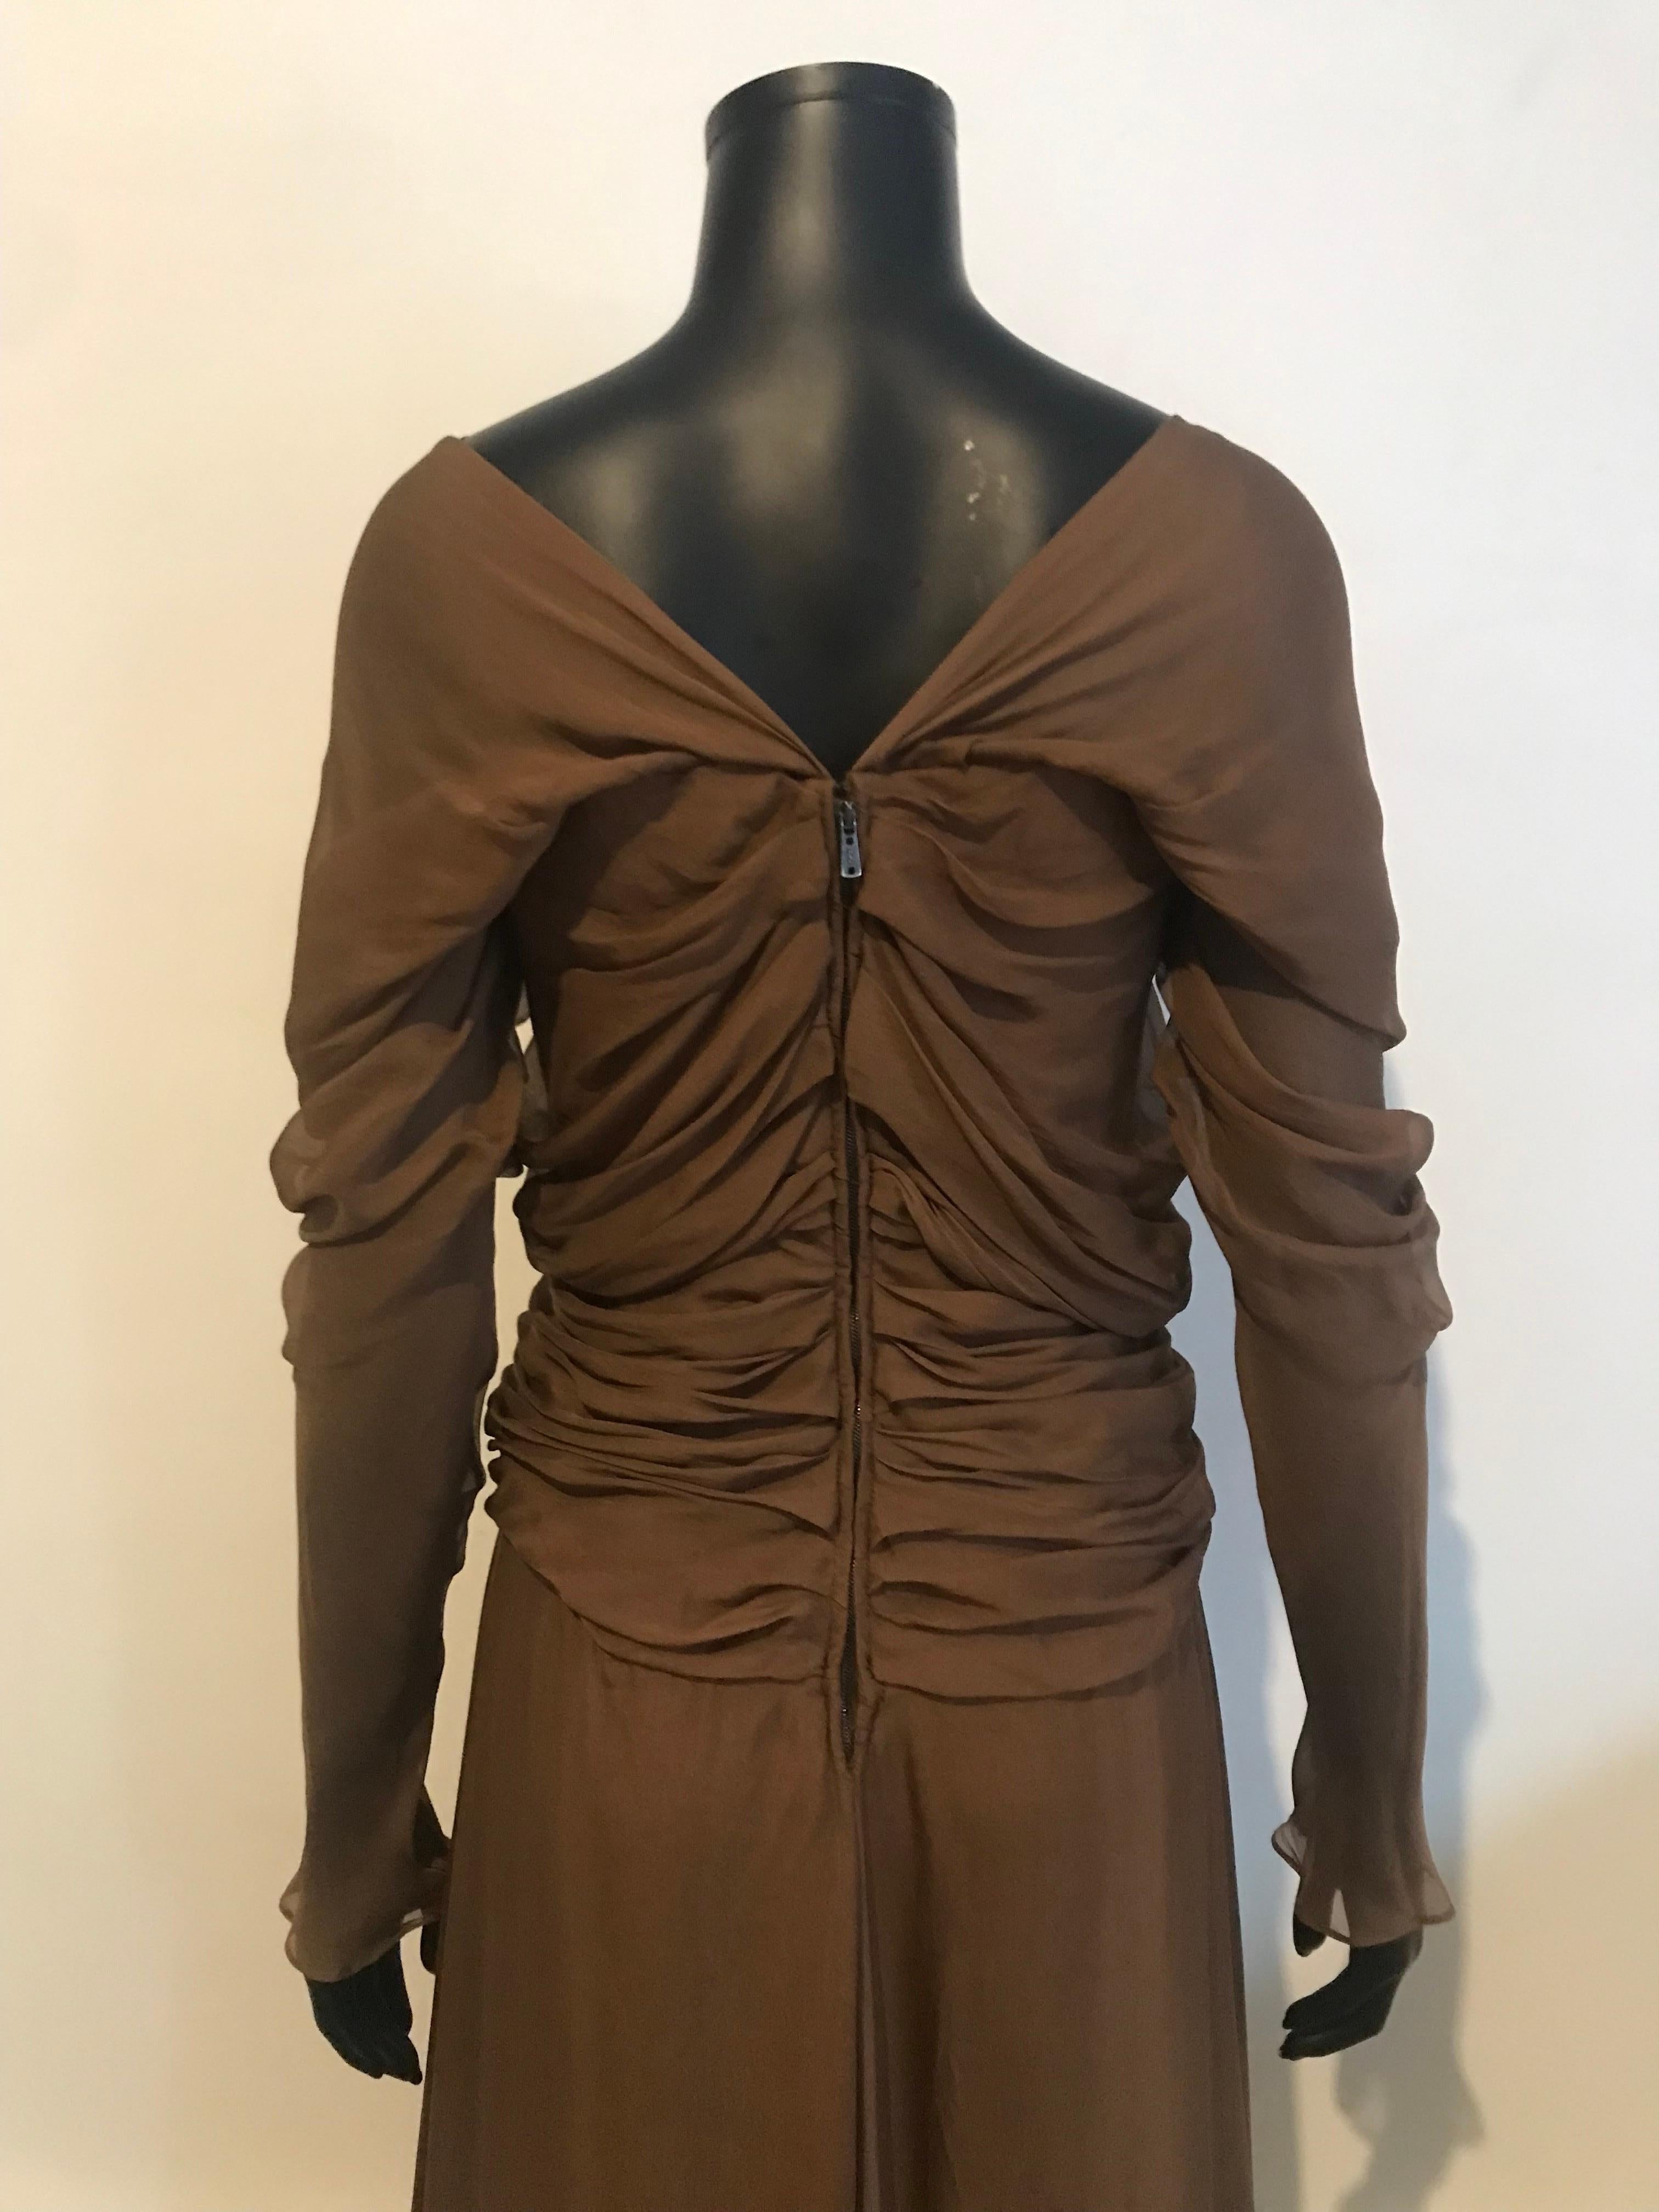 Vintage 2000’s YSL Rive Gauche by Tom Ford ruched silk chiffon evening dress For Sale 4